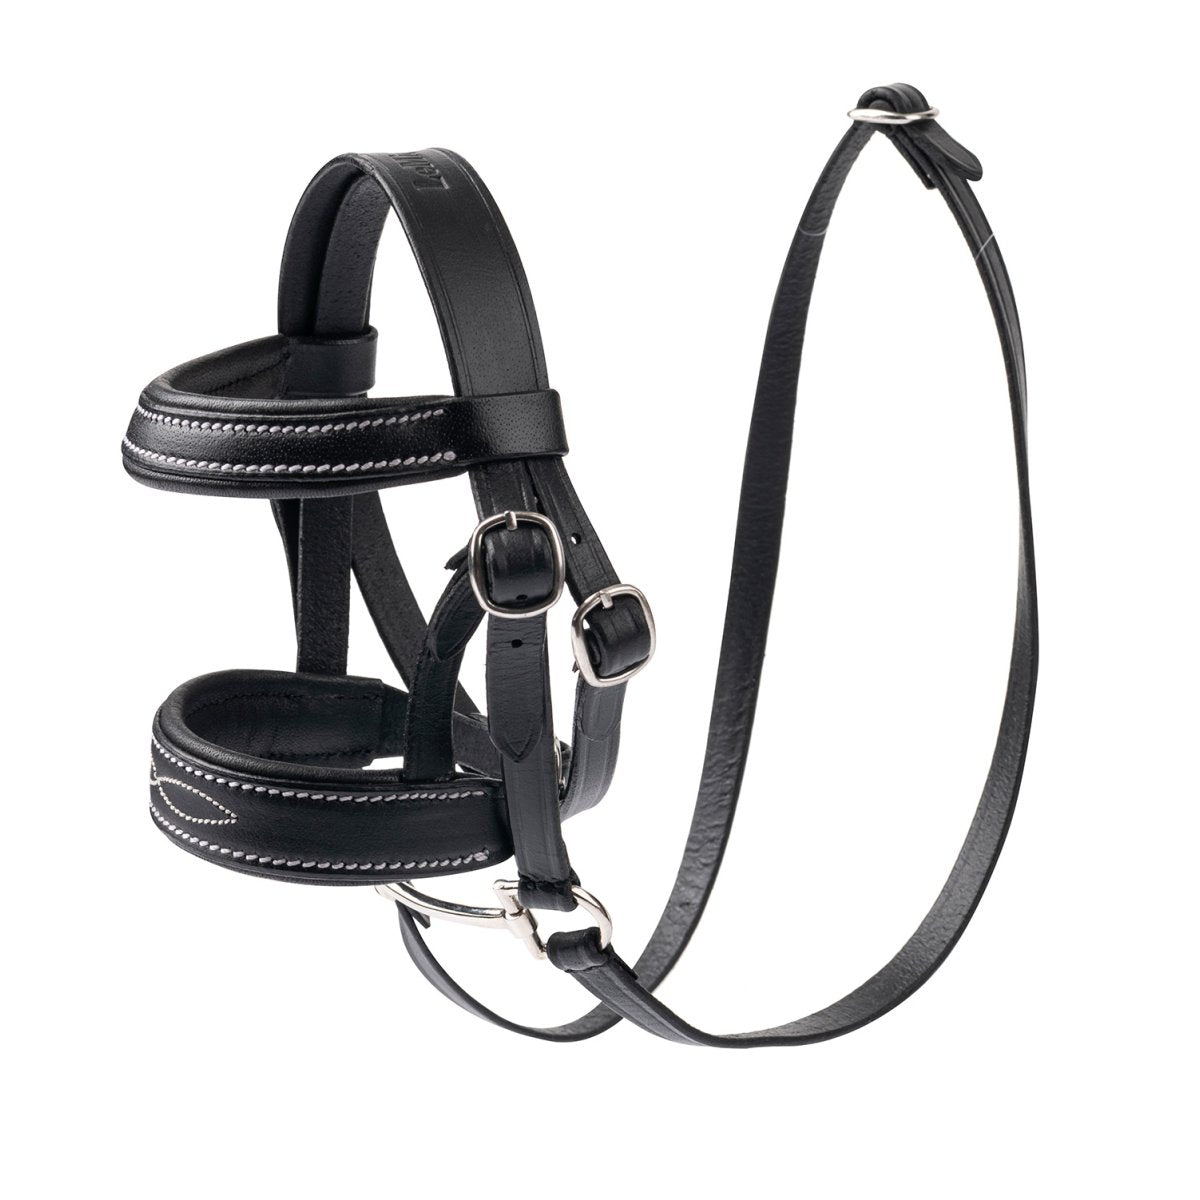 Royal Double Snaffle Leather Belts - Bridles & Reins 75 cm / 30 Inches / Black / Brass Buckles